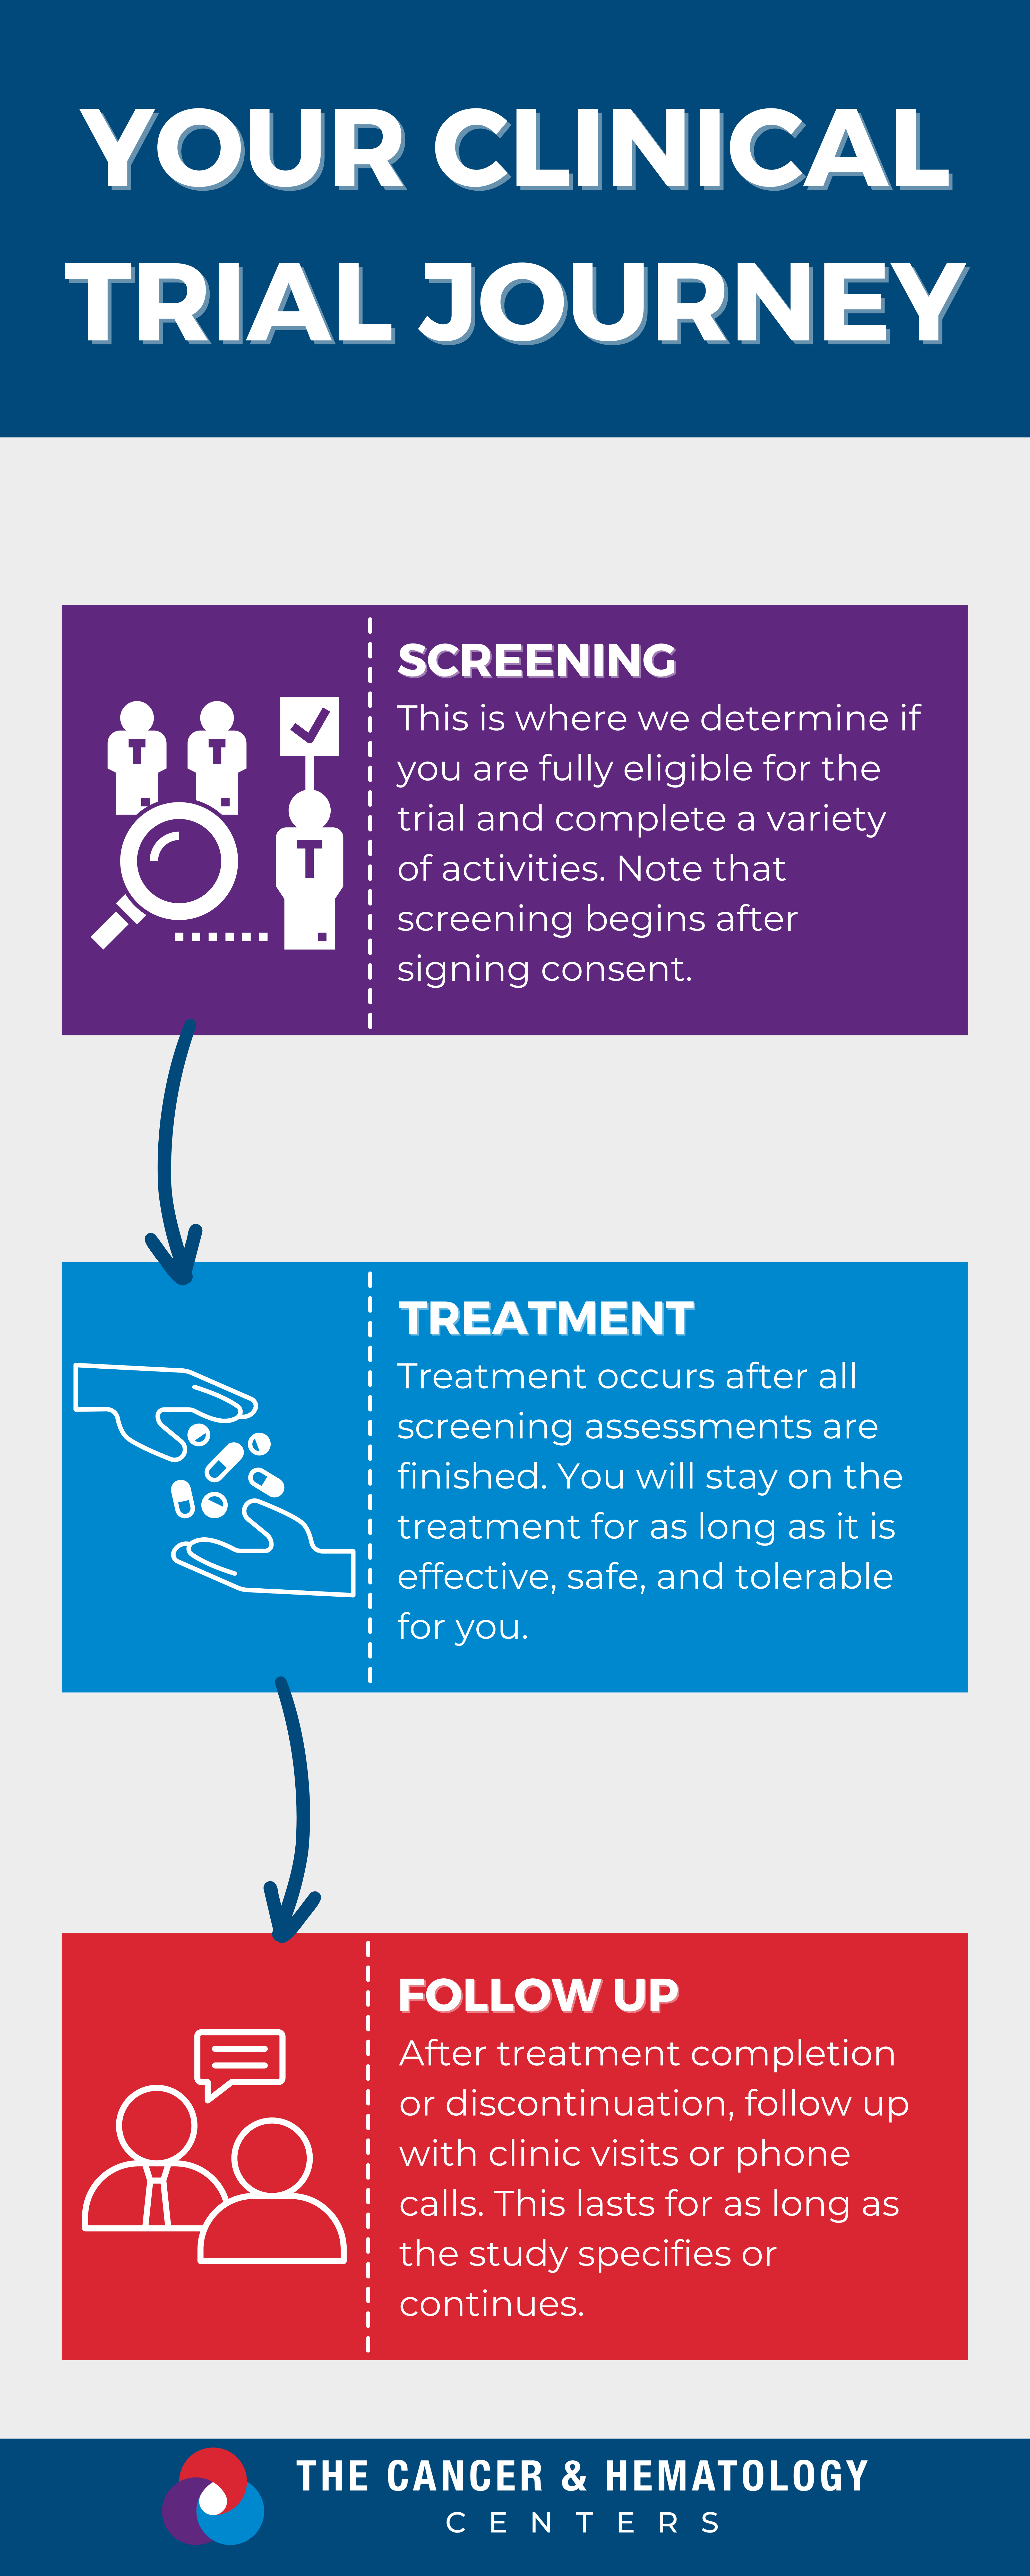 Clinical Trial Journey Infographic